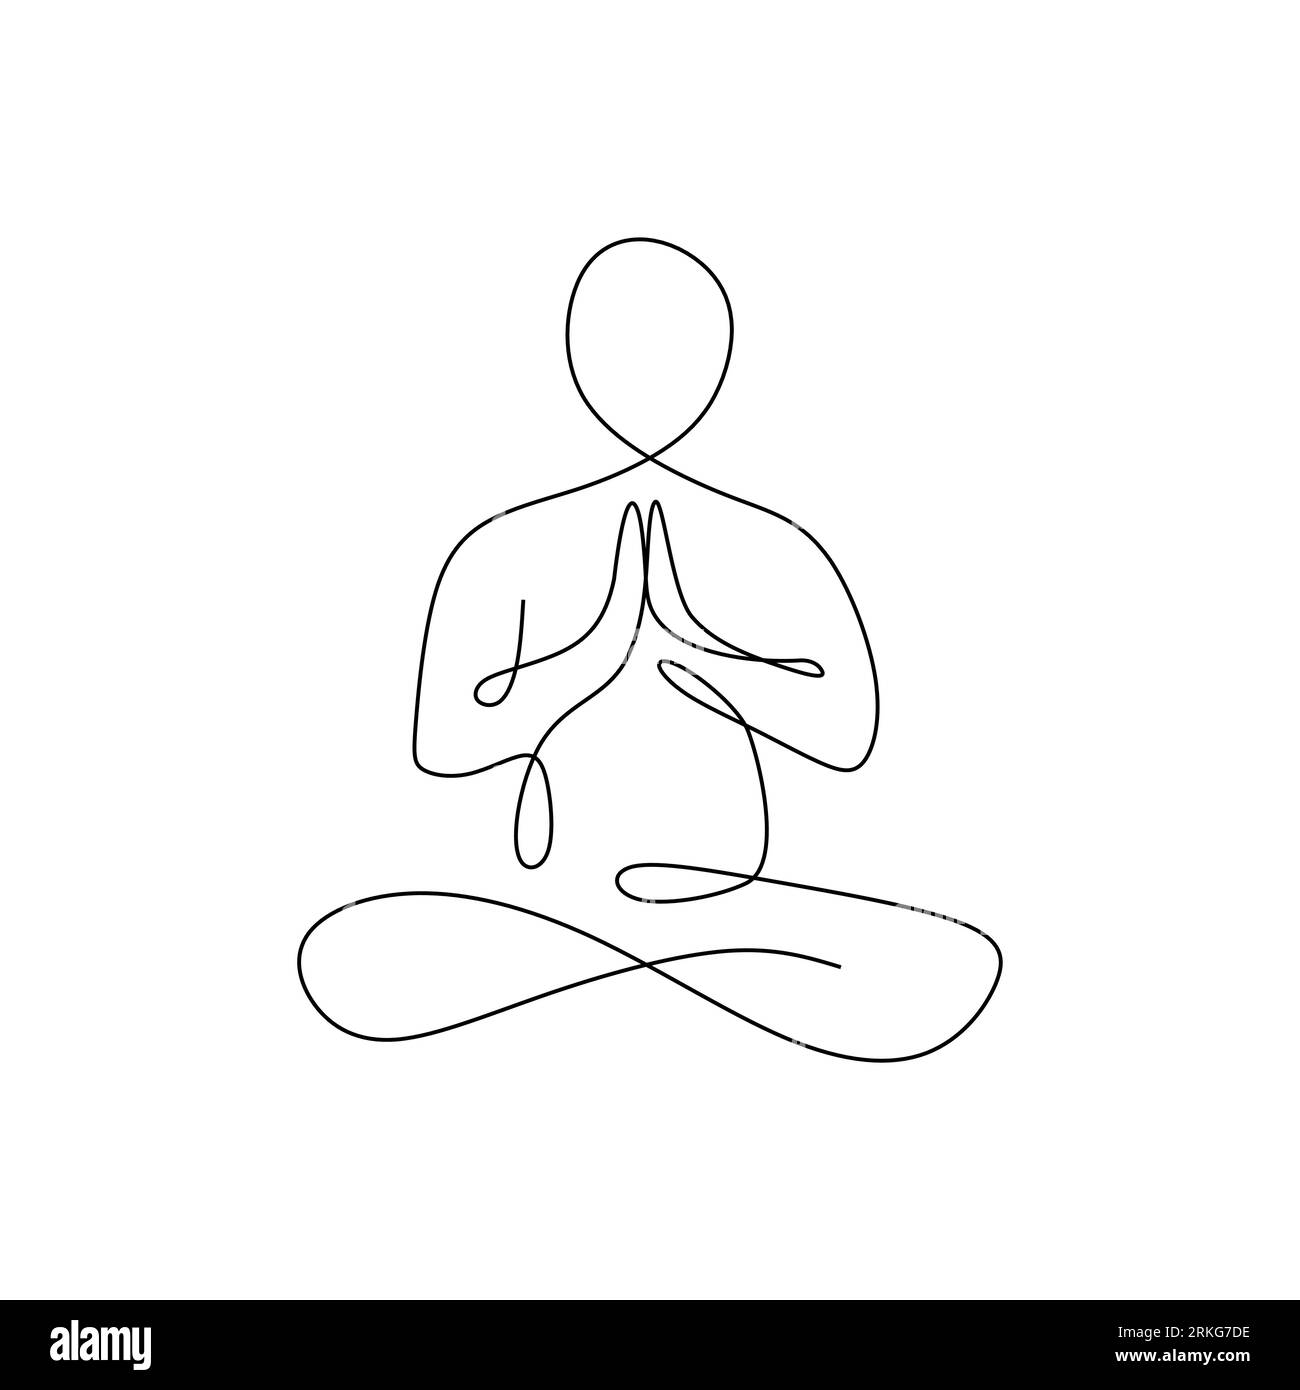 Continuous one line drawing. Man sitting cross legged meditating. continuous line drawing of women fitness yoga concept vector health illustration Stock Vector